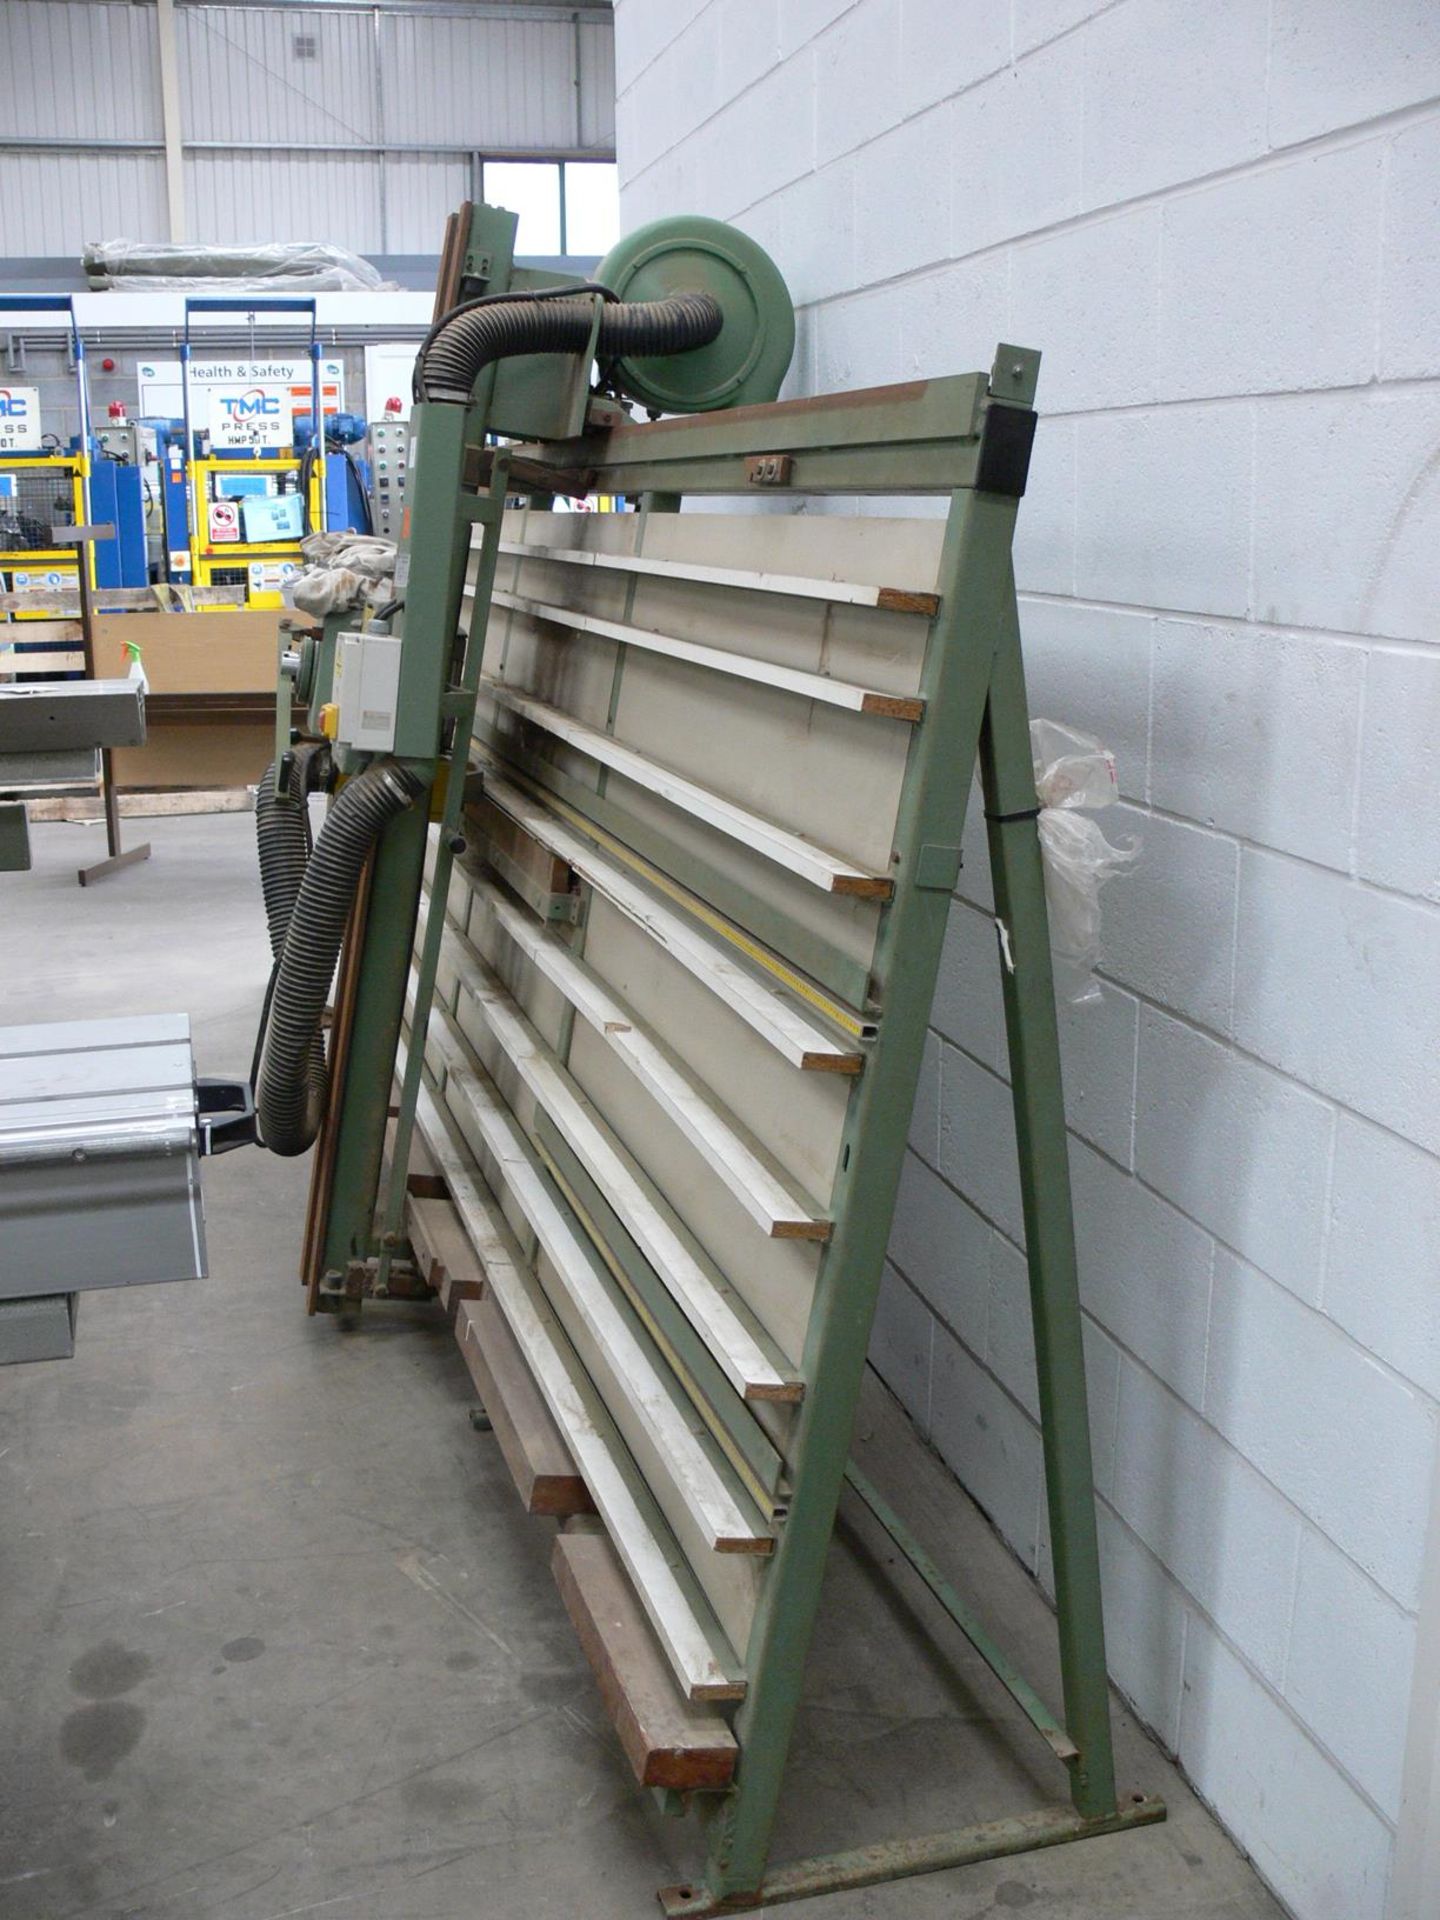 * Startrite/Harwi 1250 Vertical Panel Saw, Width: 3.3m, Height: 2.1m. Please note there is a £10+